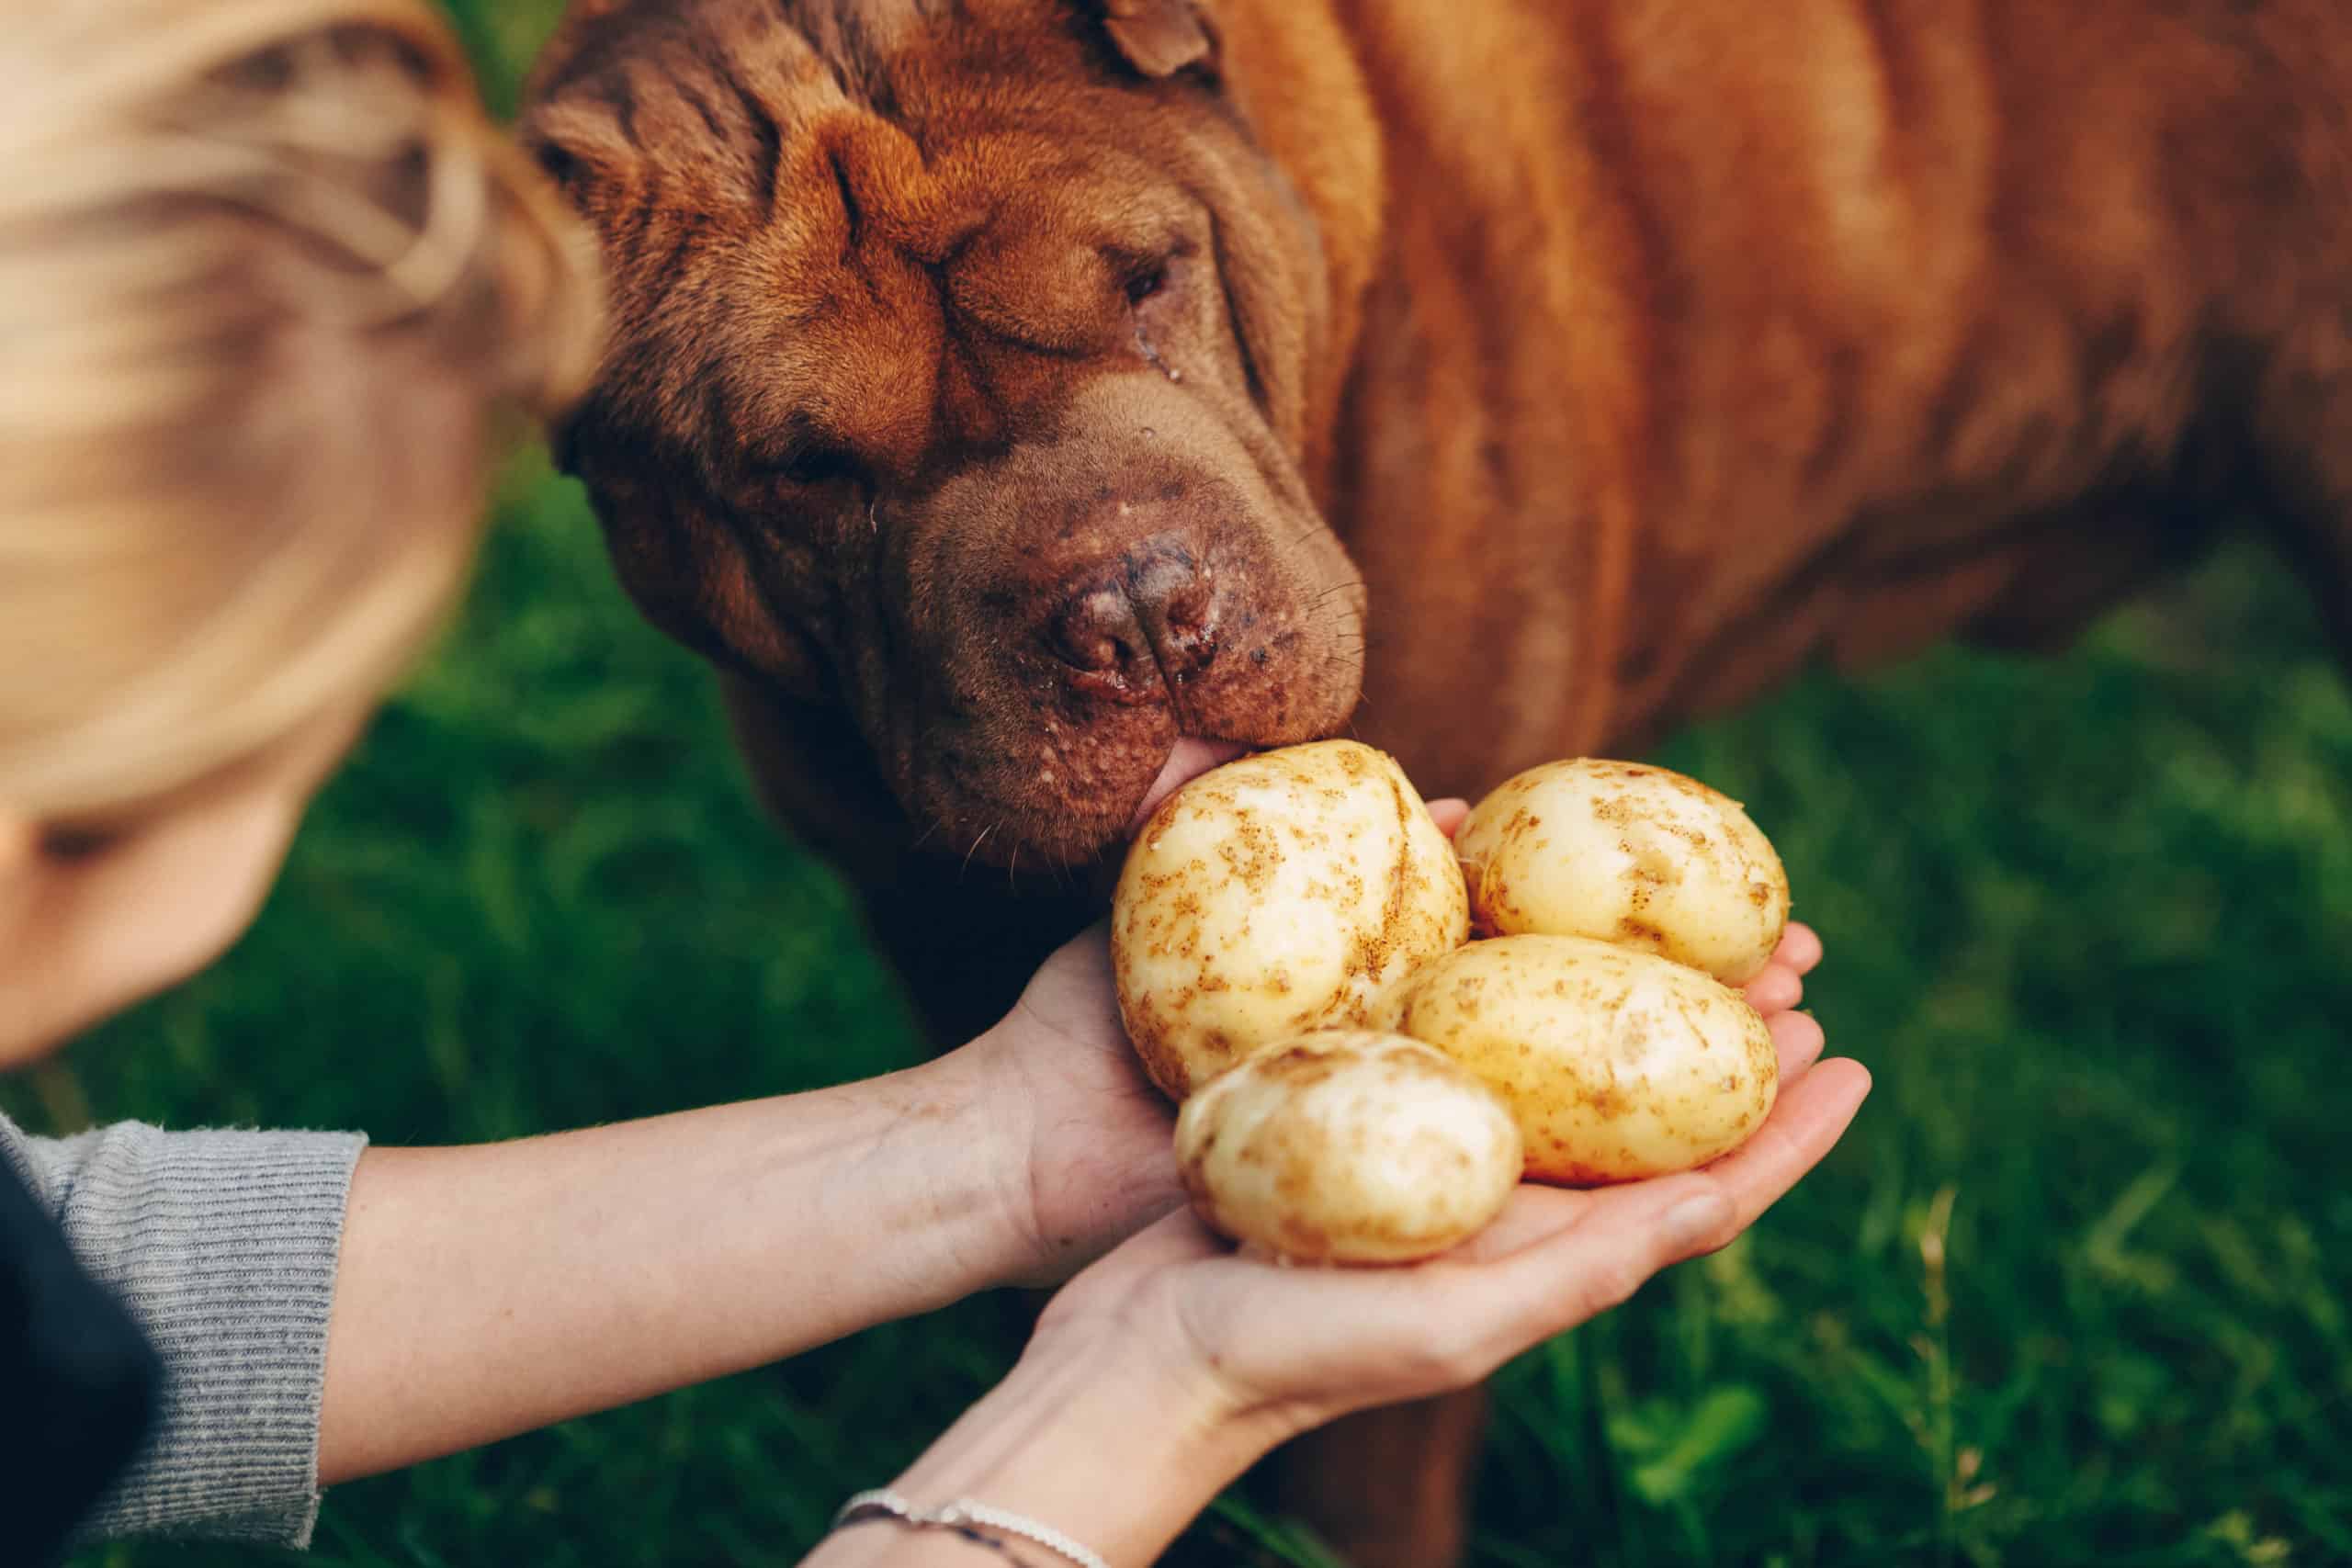 Potato harvesting. Dogs tasting the freshly harvested and washed potatoes on female hands. Locavore, clean eating,organic agriculture, local farming,growing concept. Selective focus